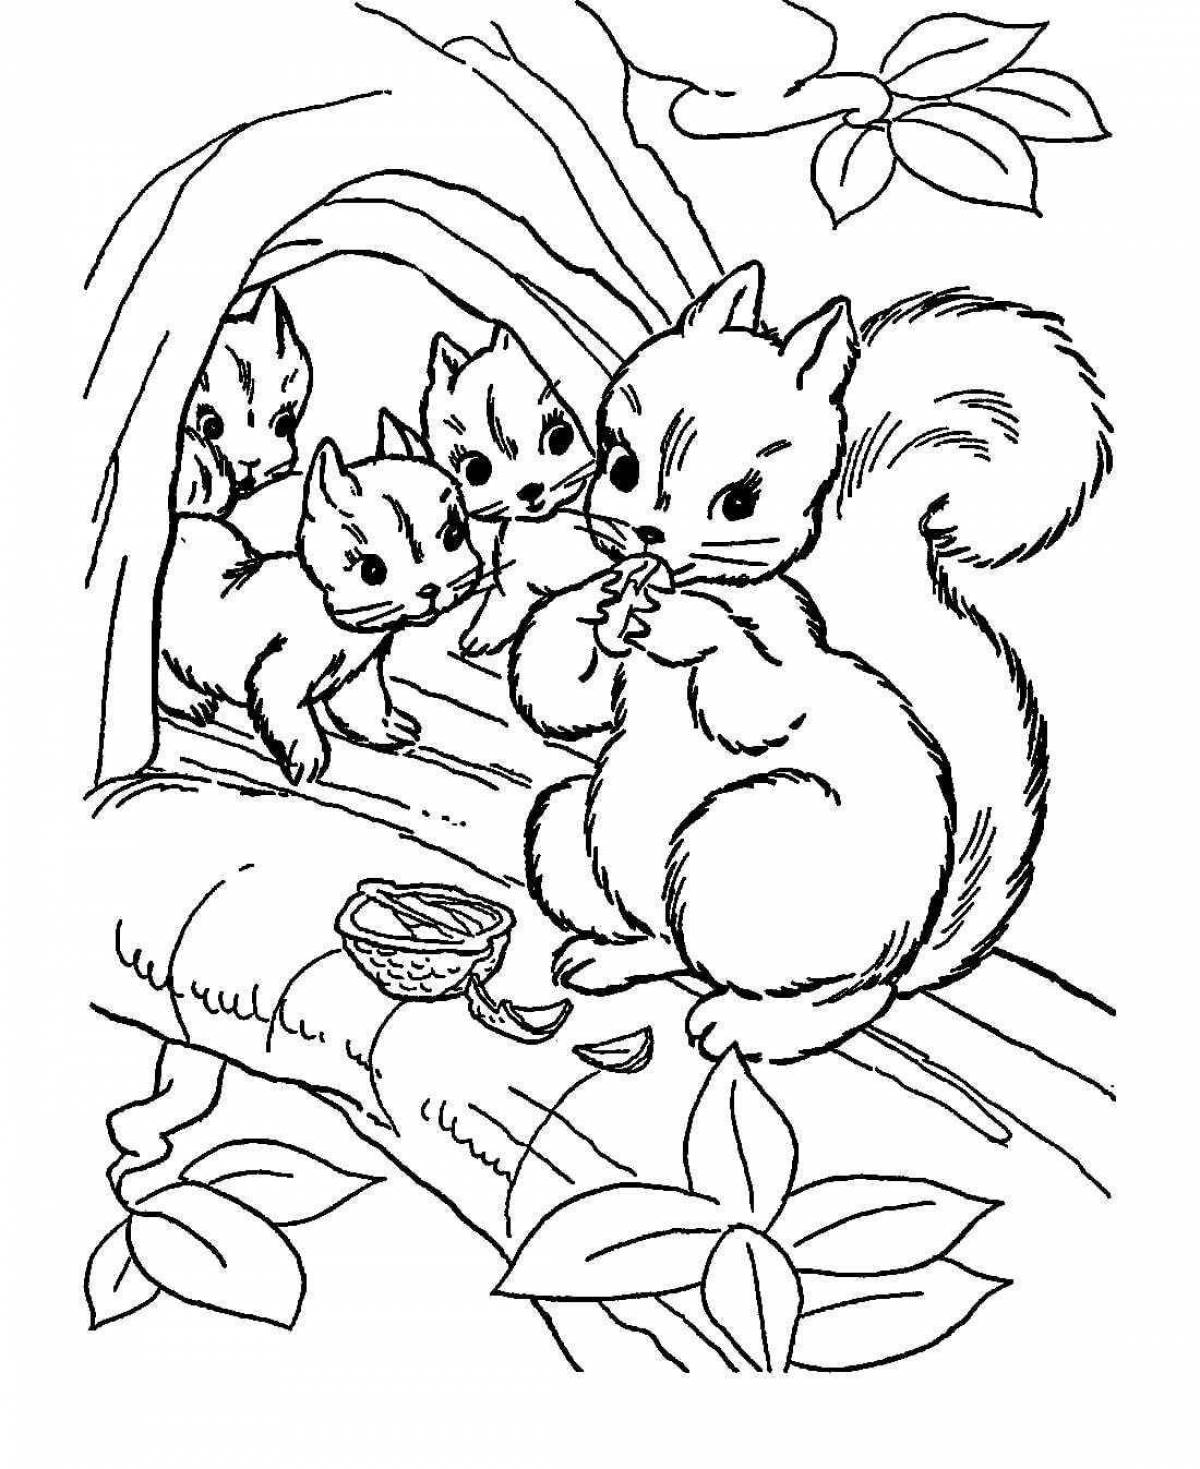 Great animal coloring pages grade 1